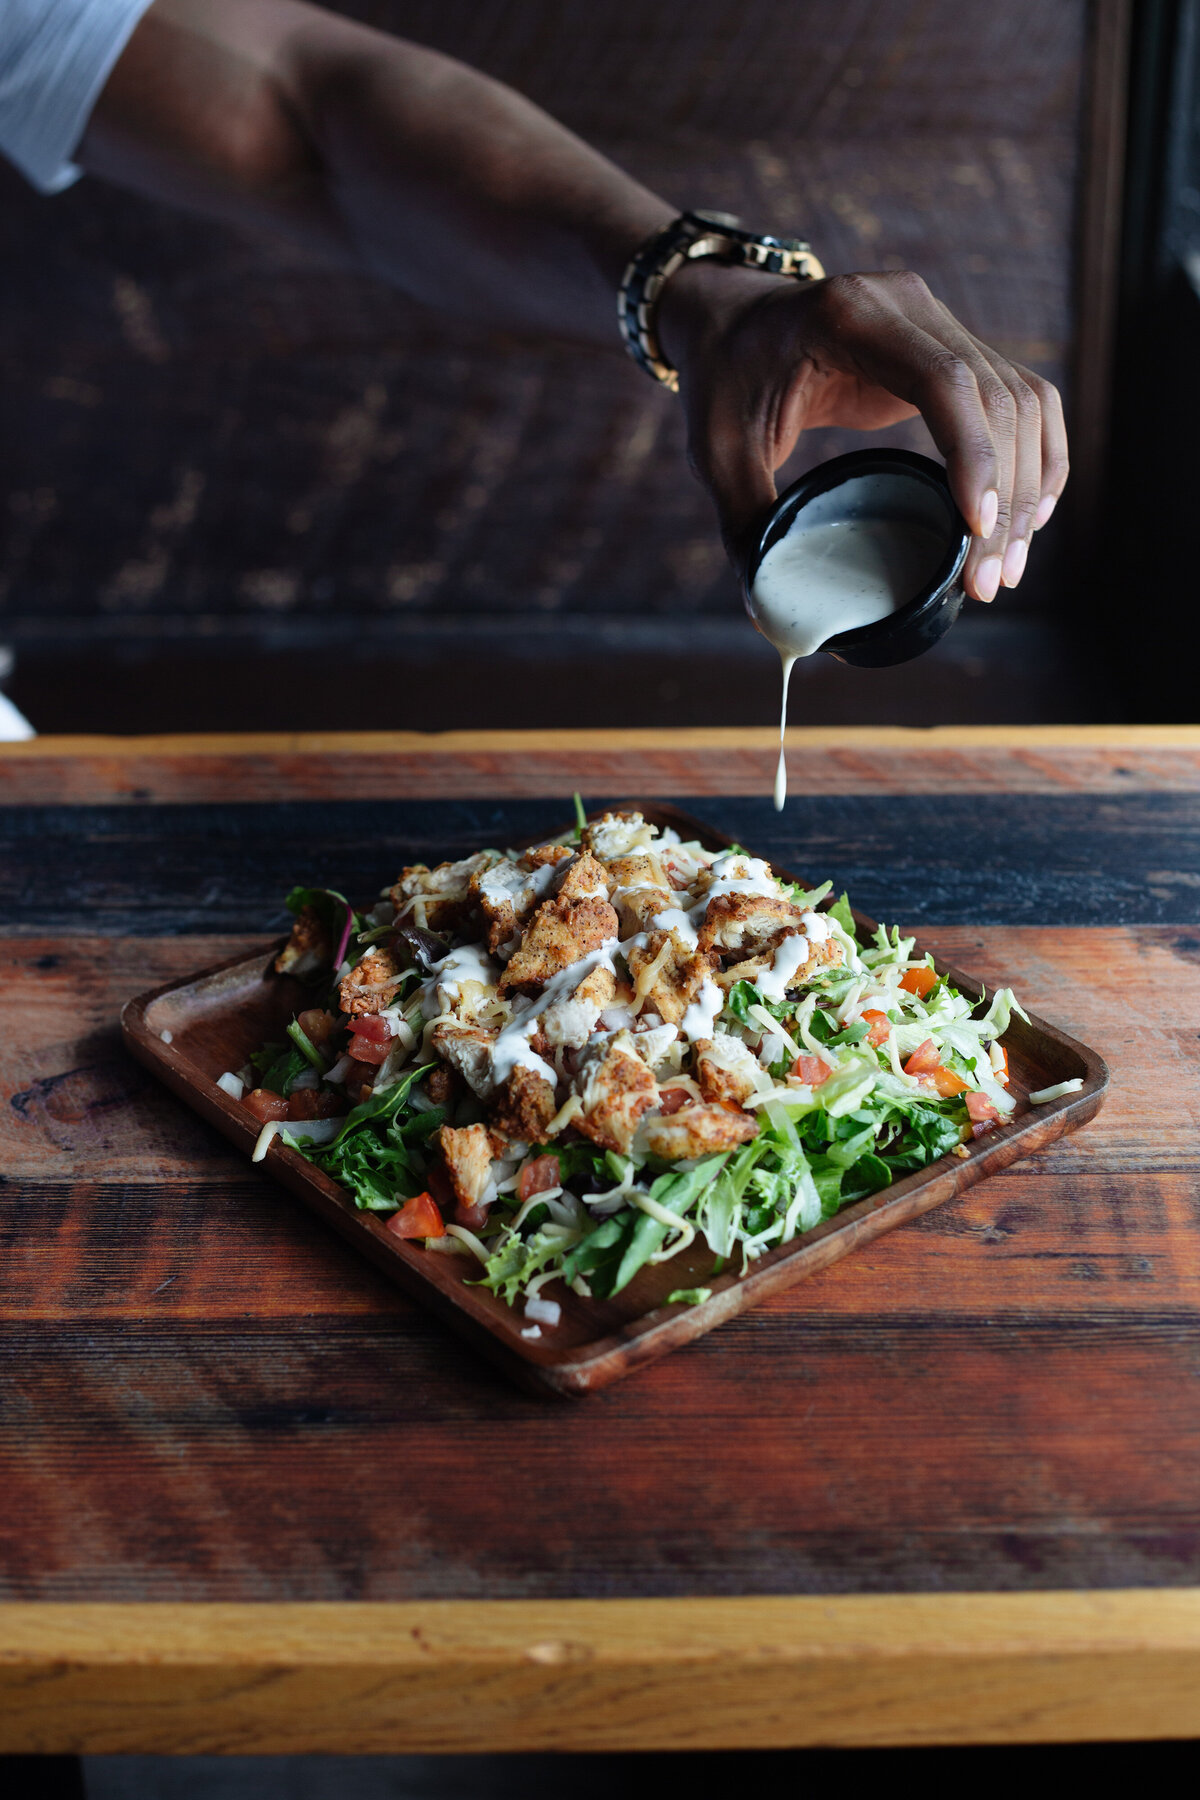 Ranch dressing being poured over a fried chicken salad on a wooden plate set on a wooden table. Natural light food photography.